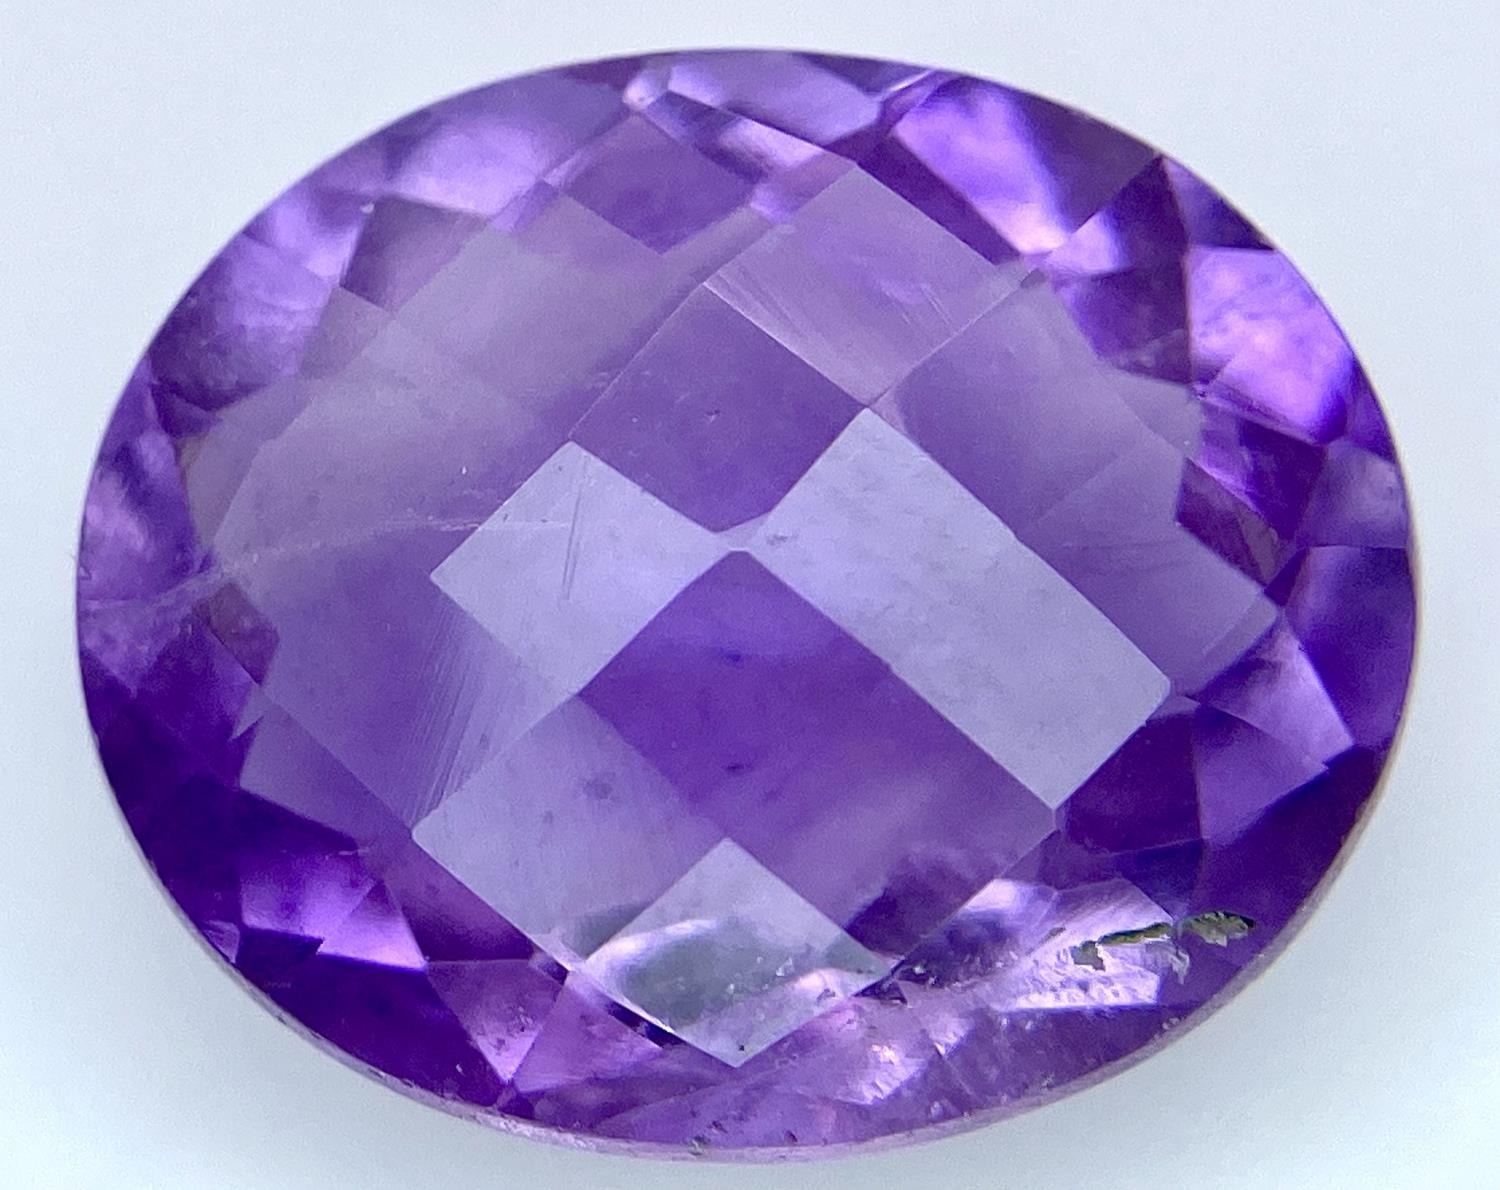 An 11.60ct Oval Faceted Amethyst - IDT Certified.